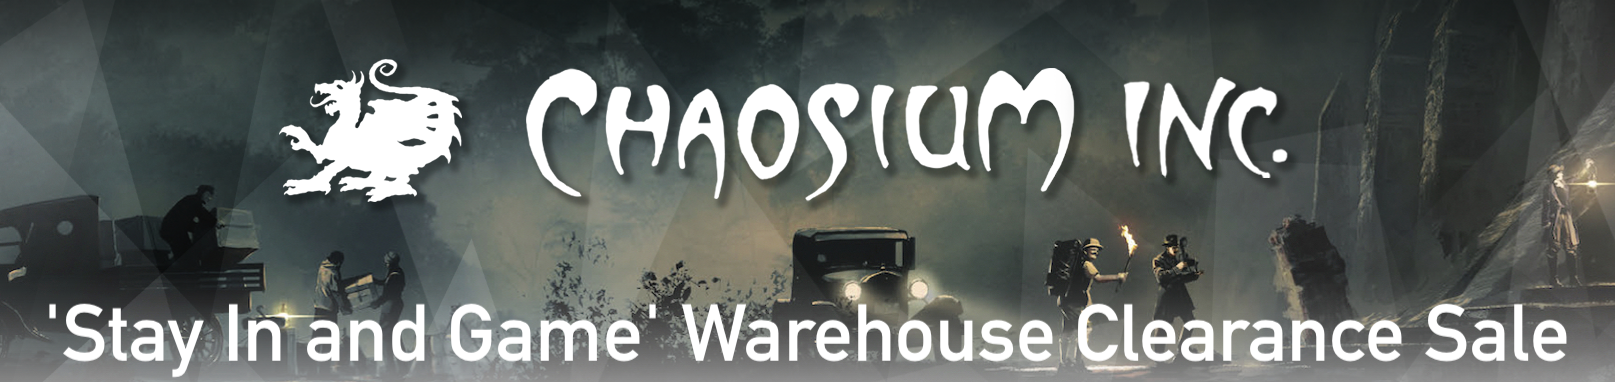 stay-in-and-game-warehouse-clearance-sale-3-.png